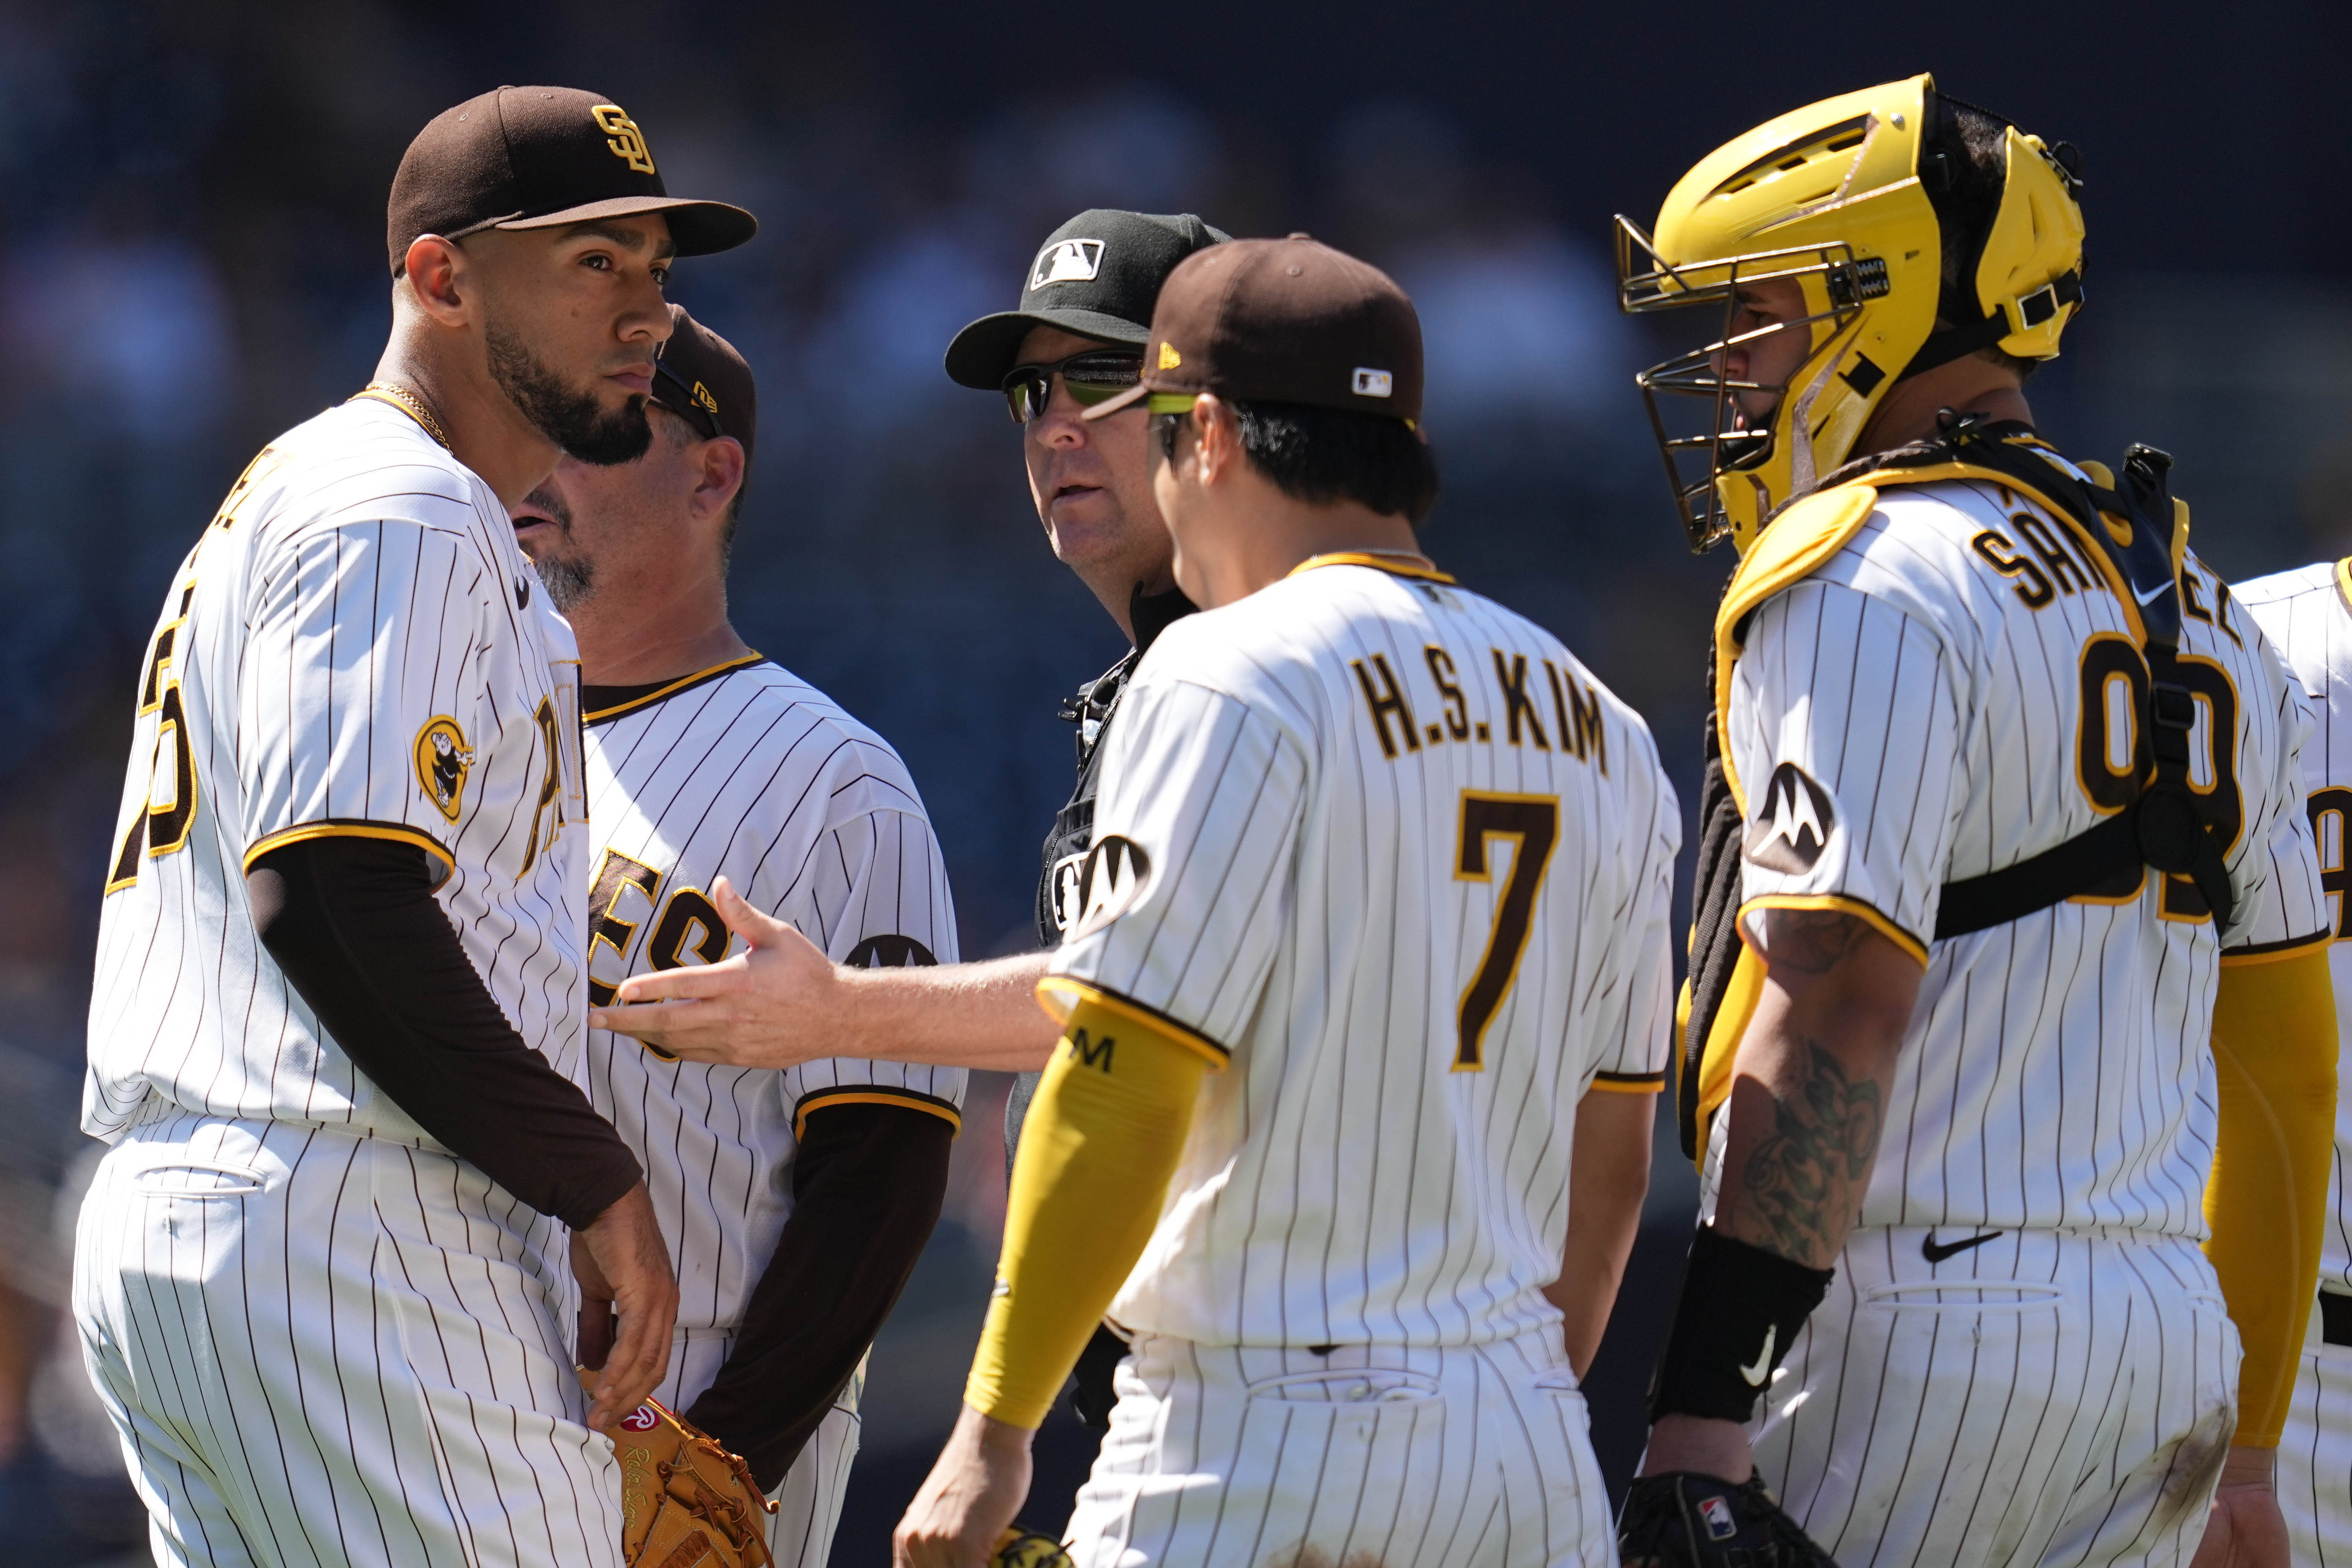 Are the Padres in Trouble?